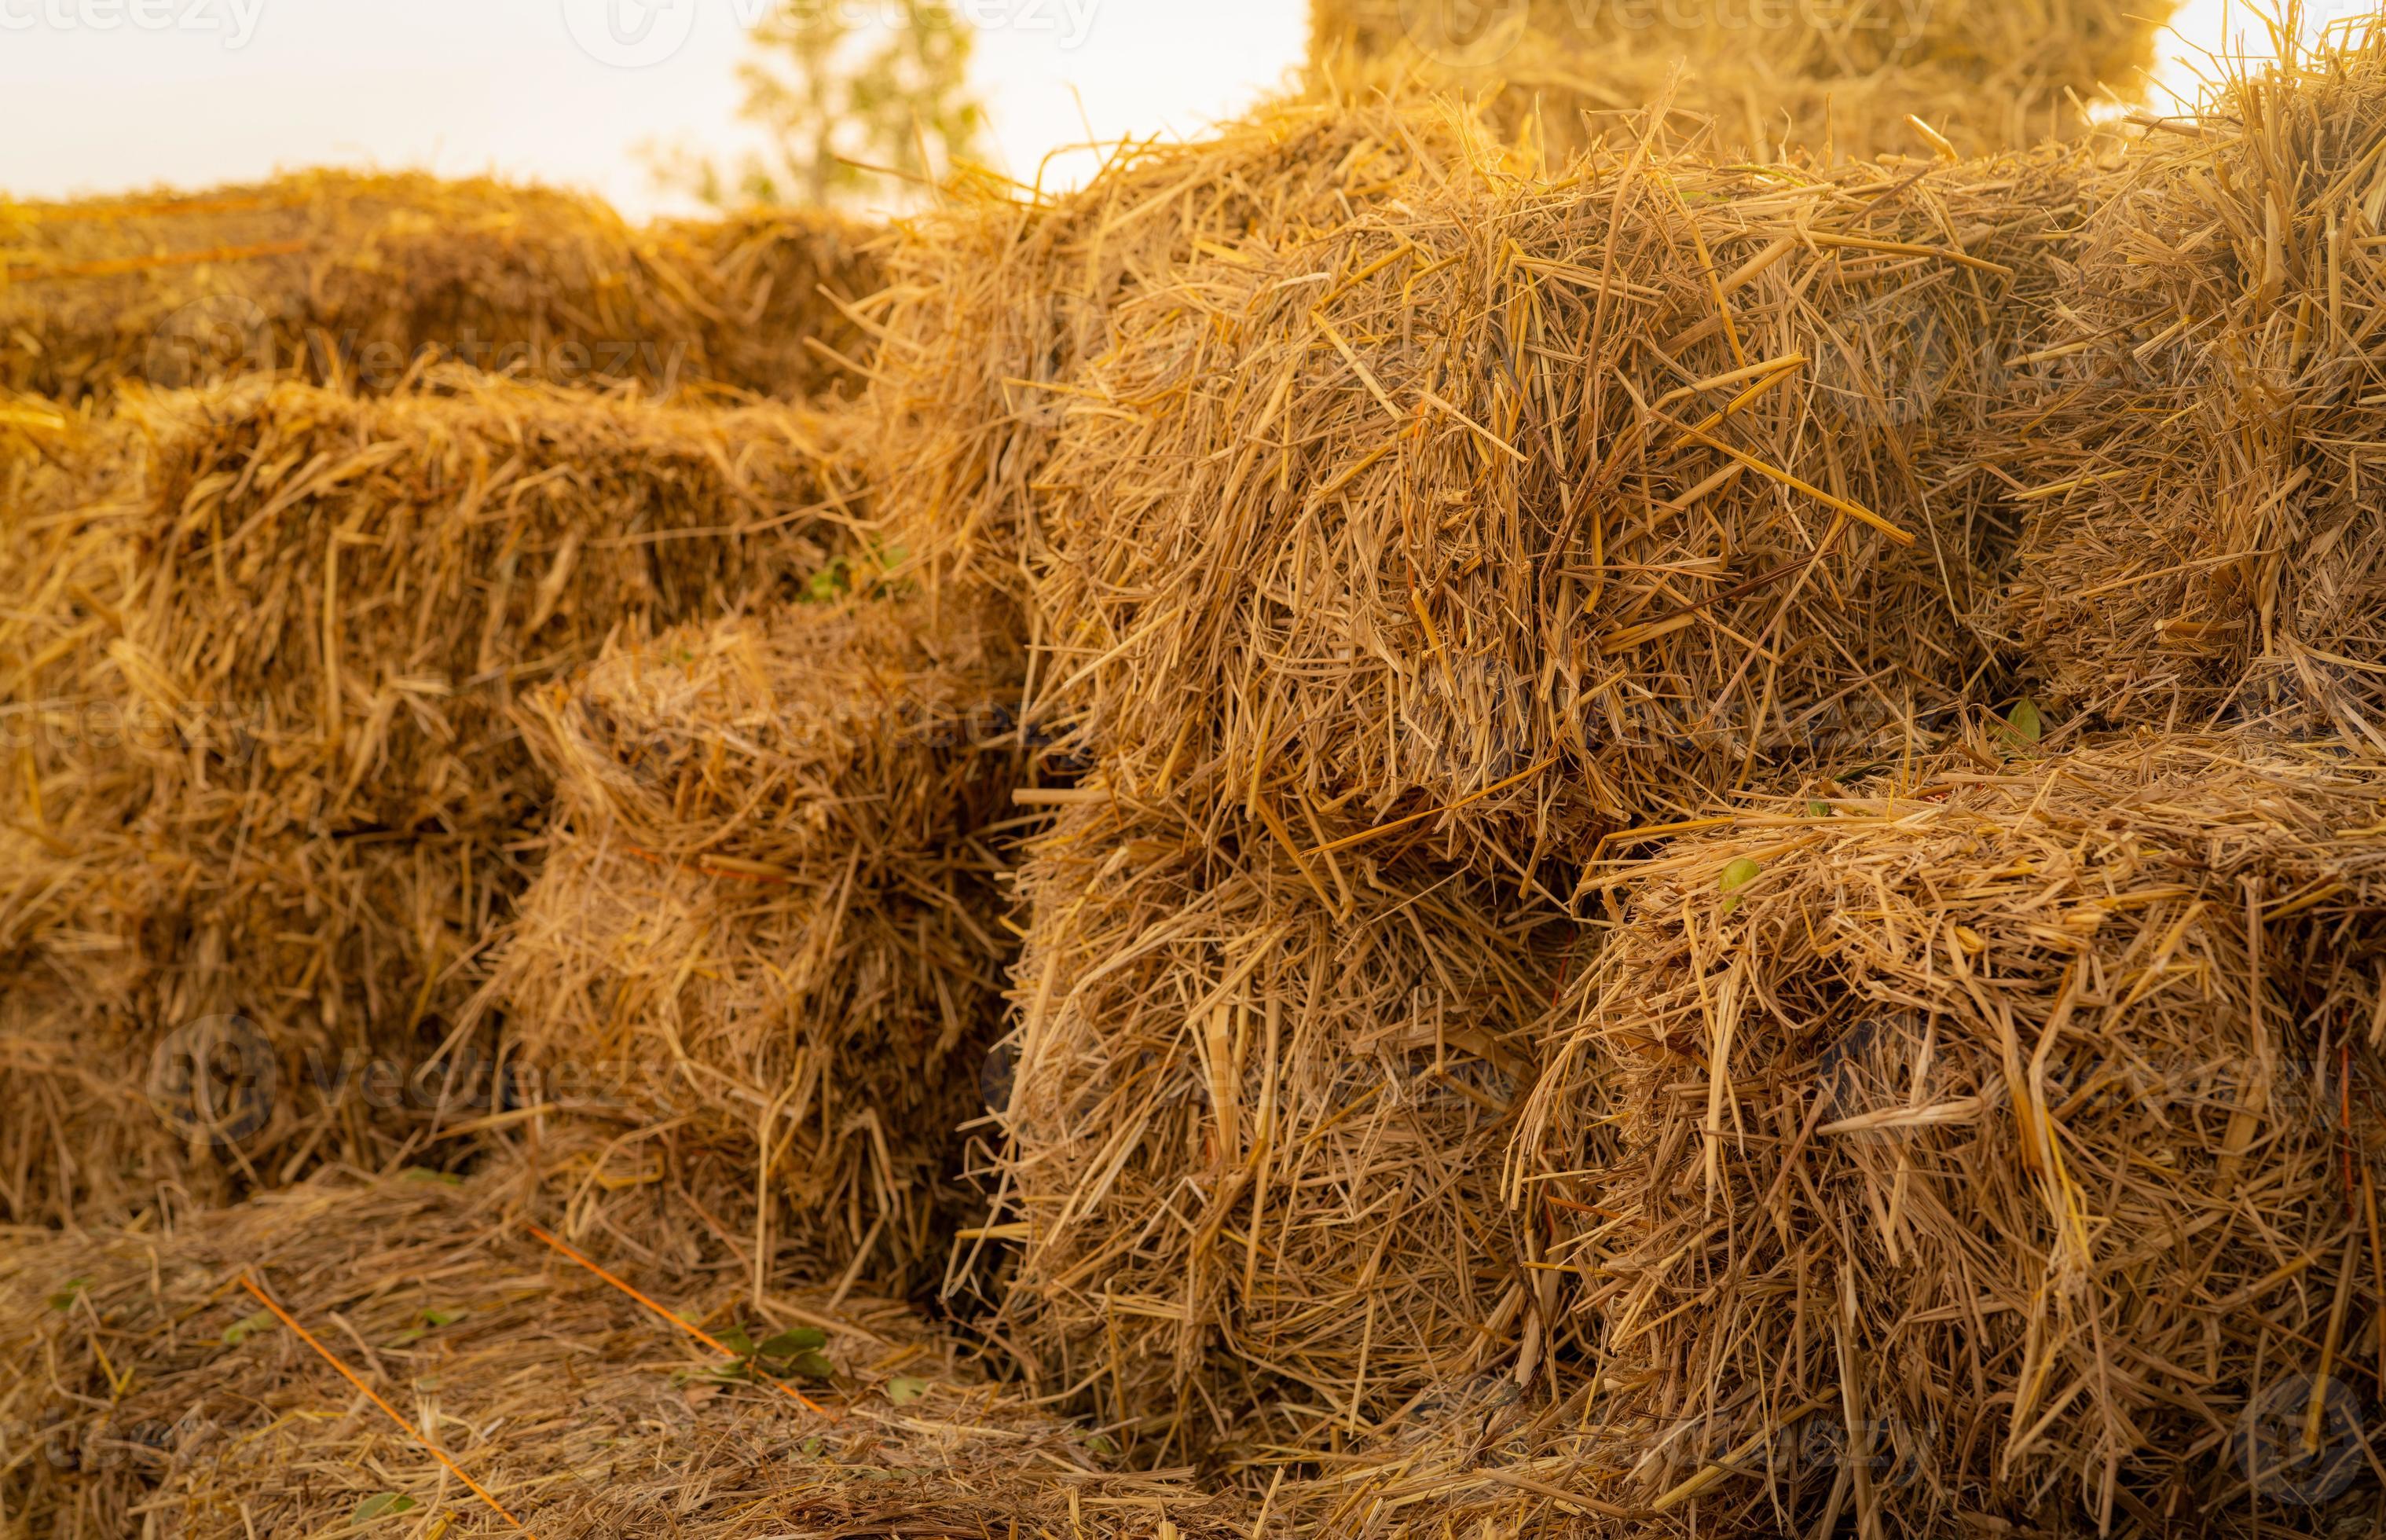 Dry straw bale. Pile of stacked yellow straw bales. Haystack in farm. Animal  fodder. Agricultural byproduct. Food and bedding for cows, horse, poultry,  sheep, and livestock. Hay stack for animal feed. 7789151